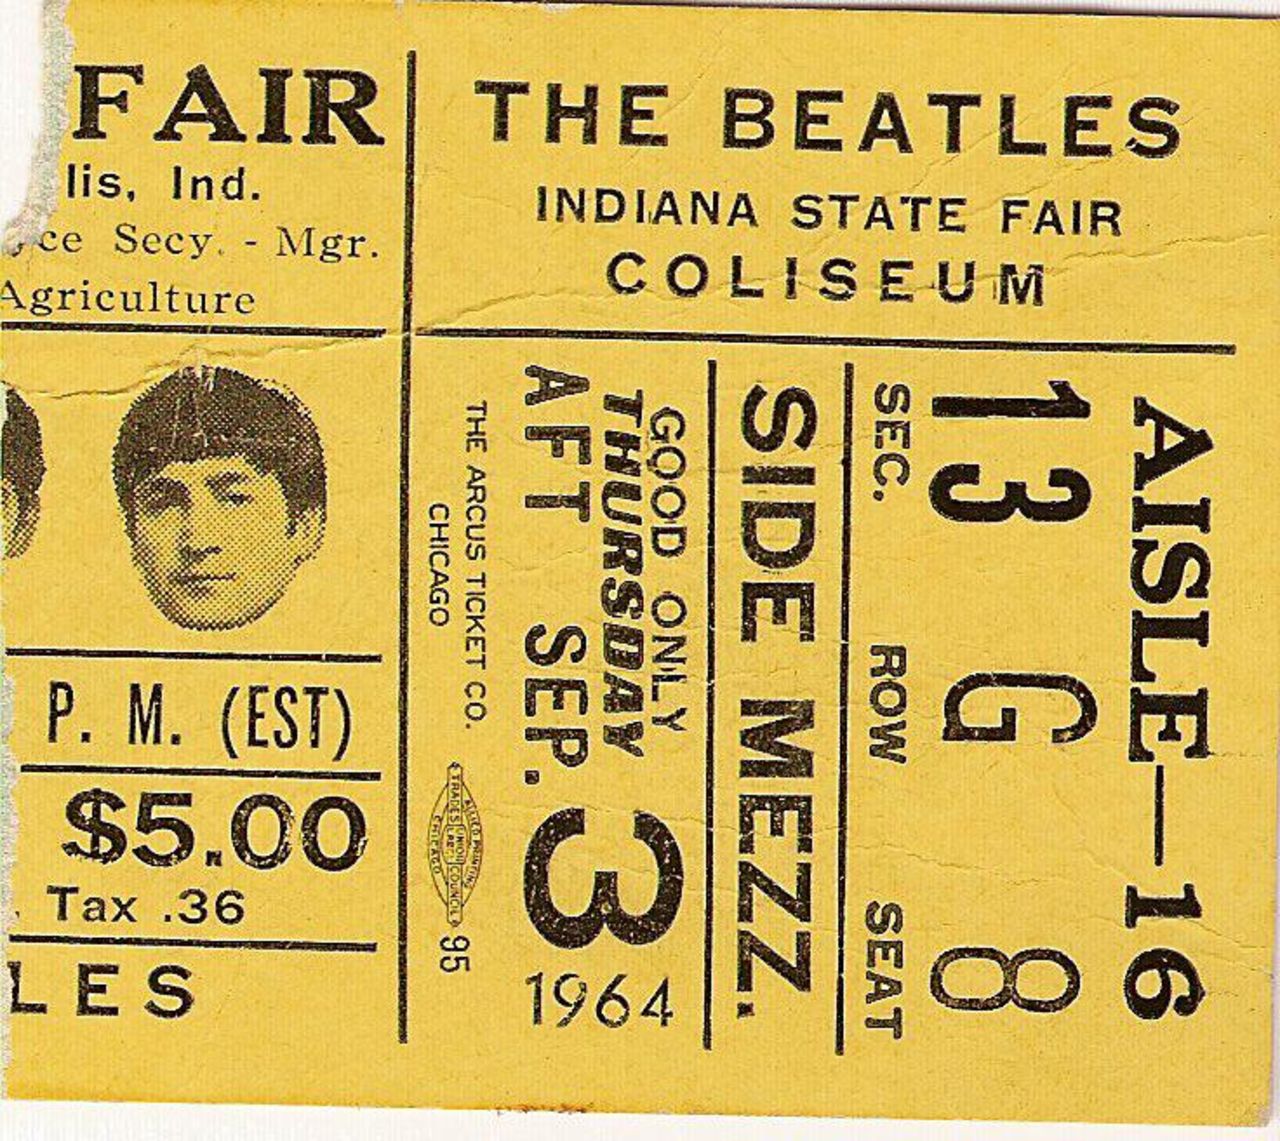 After many months of following The Beatles' every move, <a href="http://ireport.cnn.com/docs/DOC-1075385">Rebecca James </a>finally got to see them perform live at the Indiana State Fair in September 1964. She still has the ticket stub.